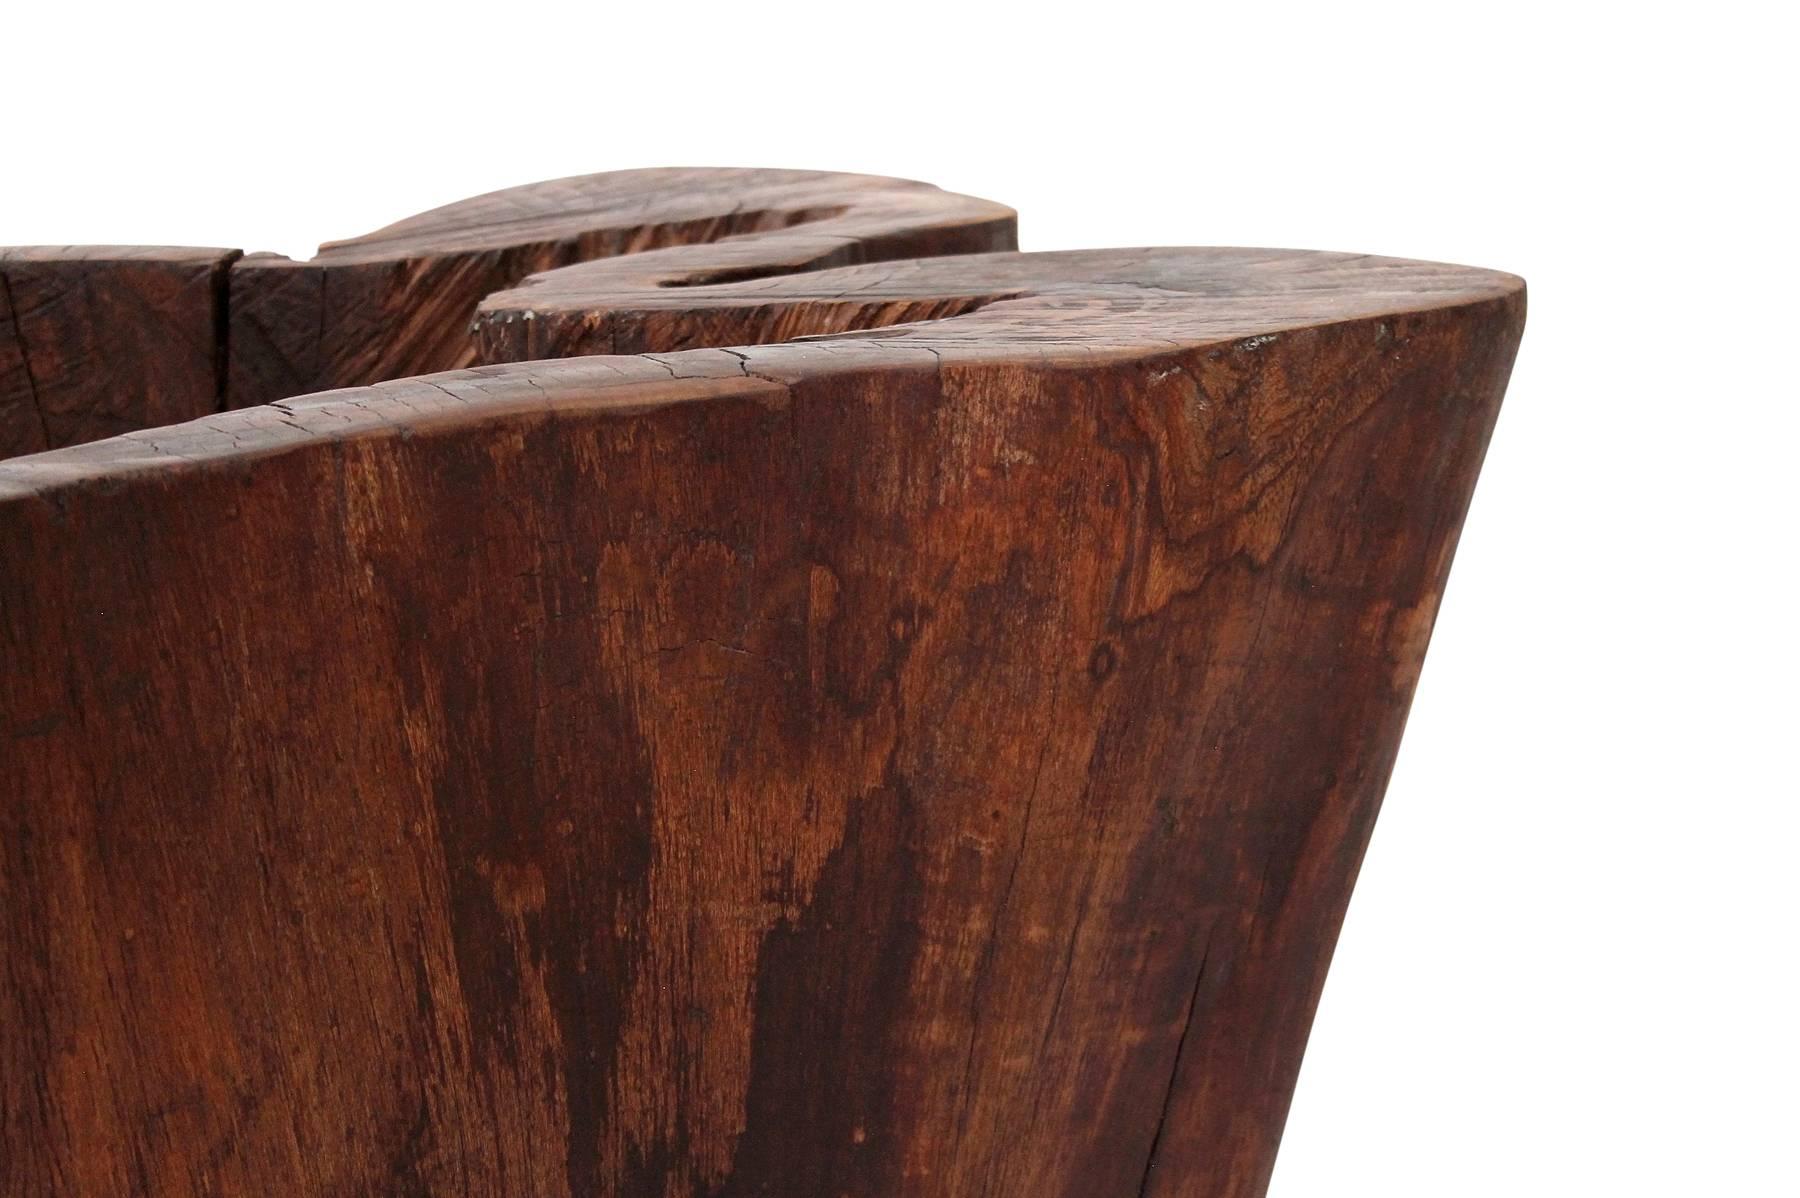 Carved Hollow Stump Coffee Table 1